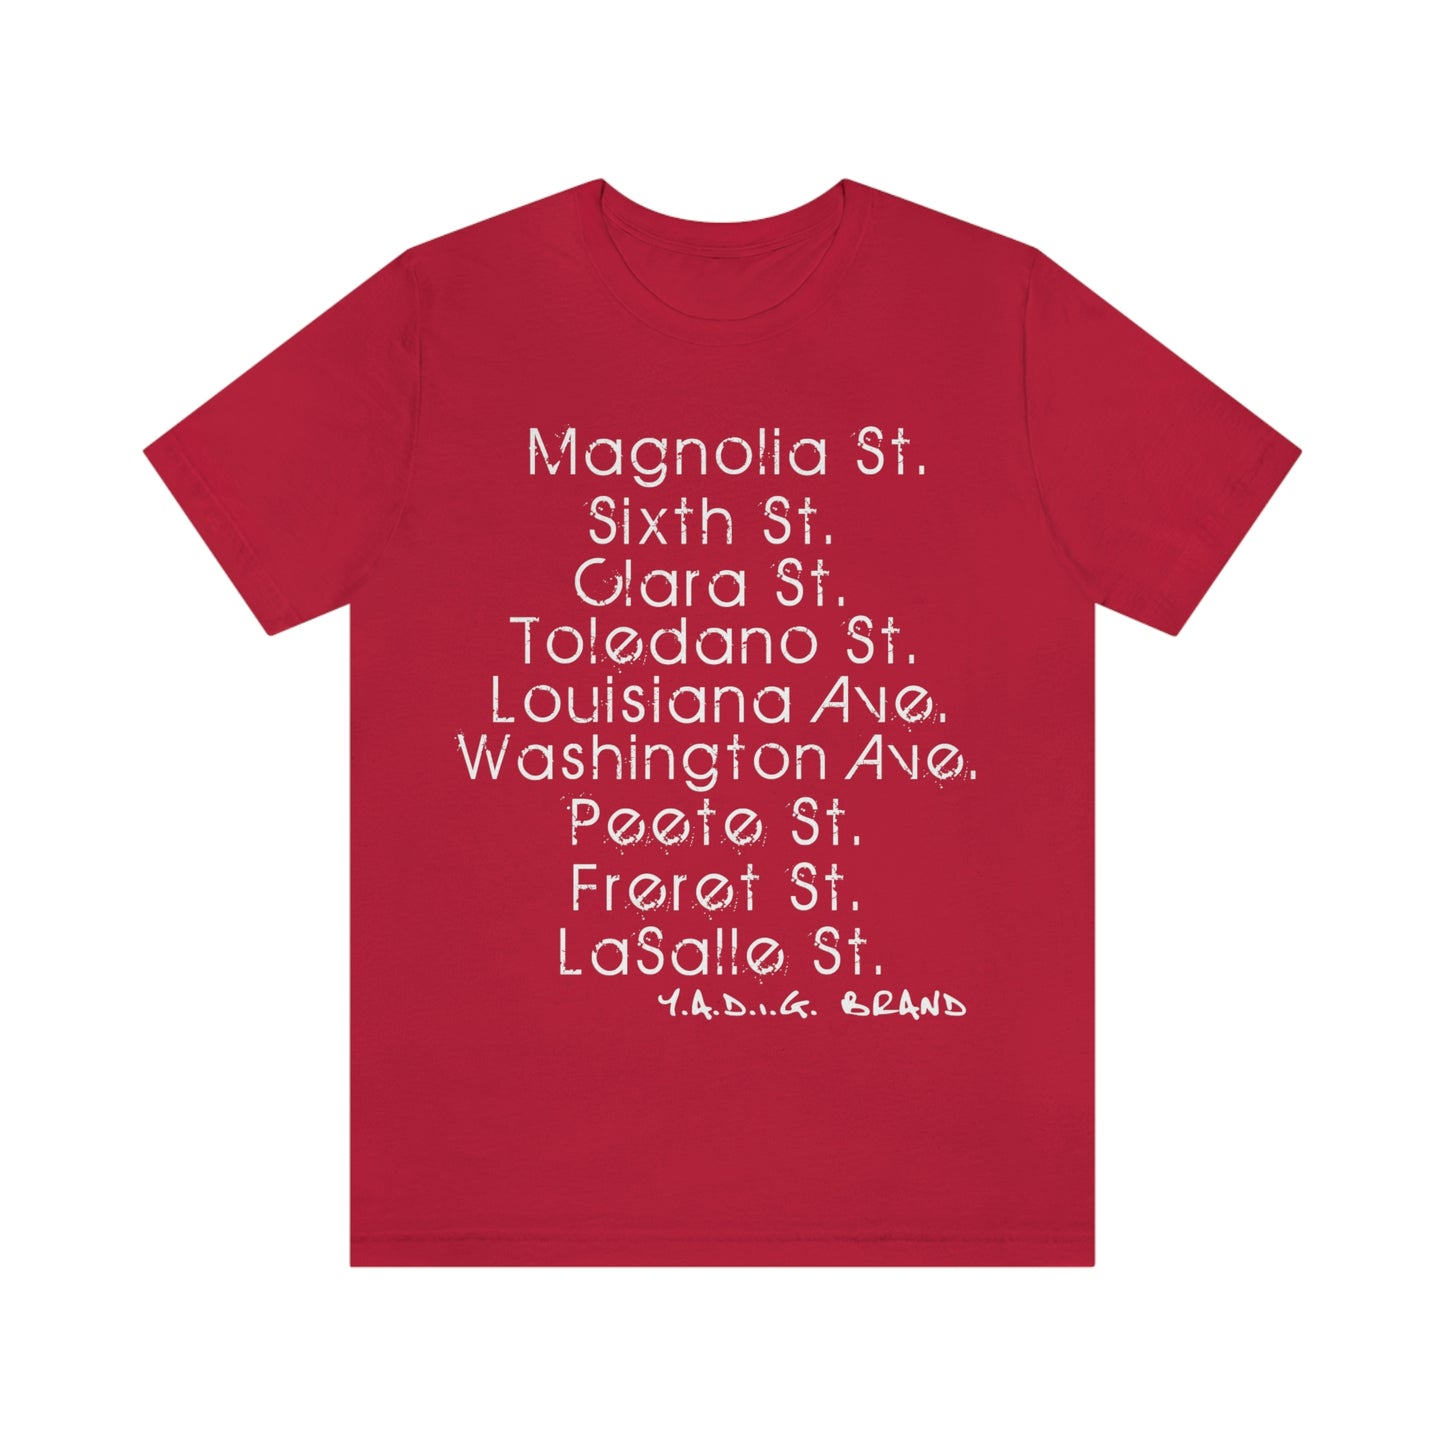 Magnolia Projects 2nd Edition T-Shirt